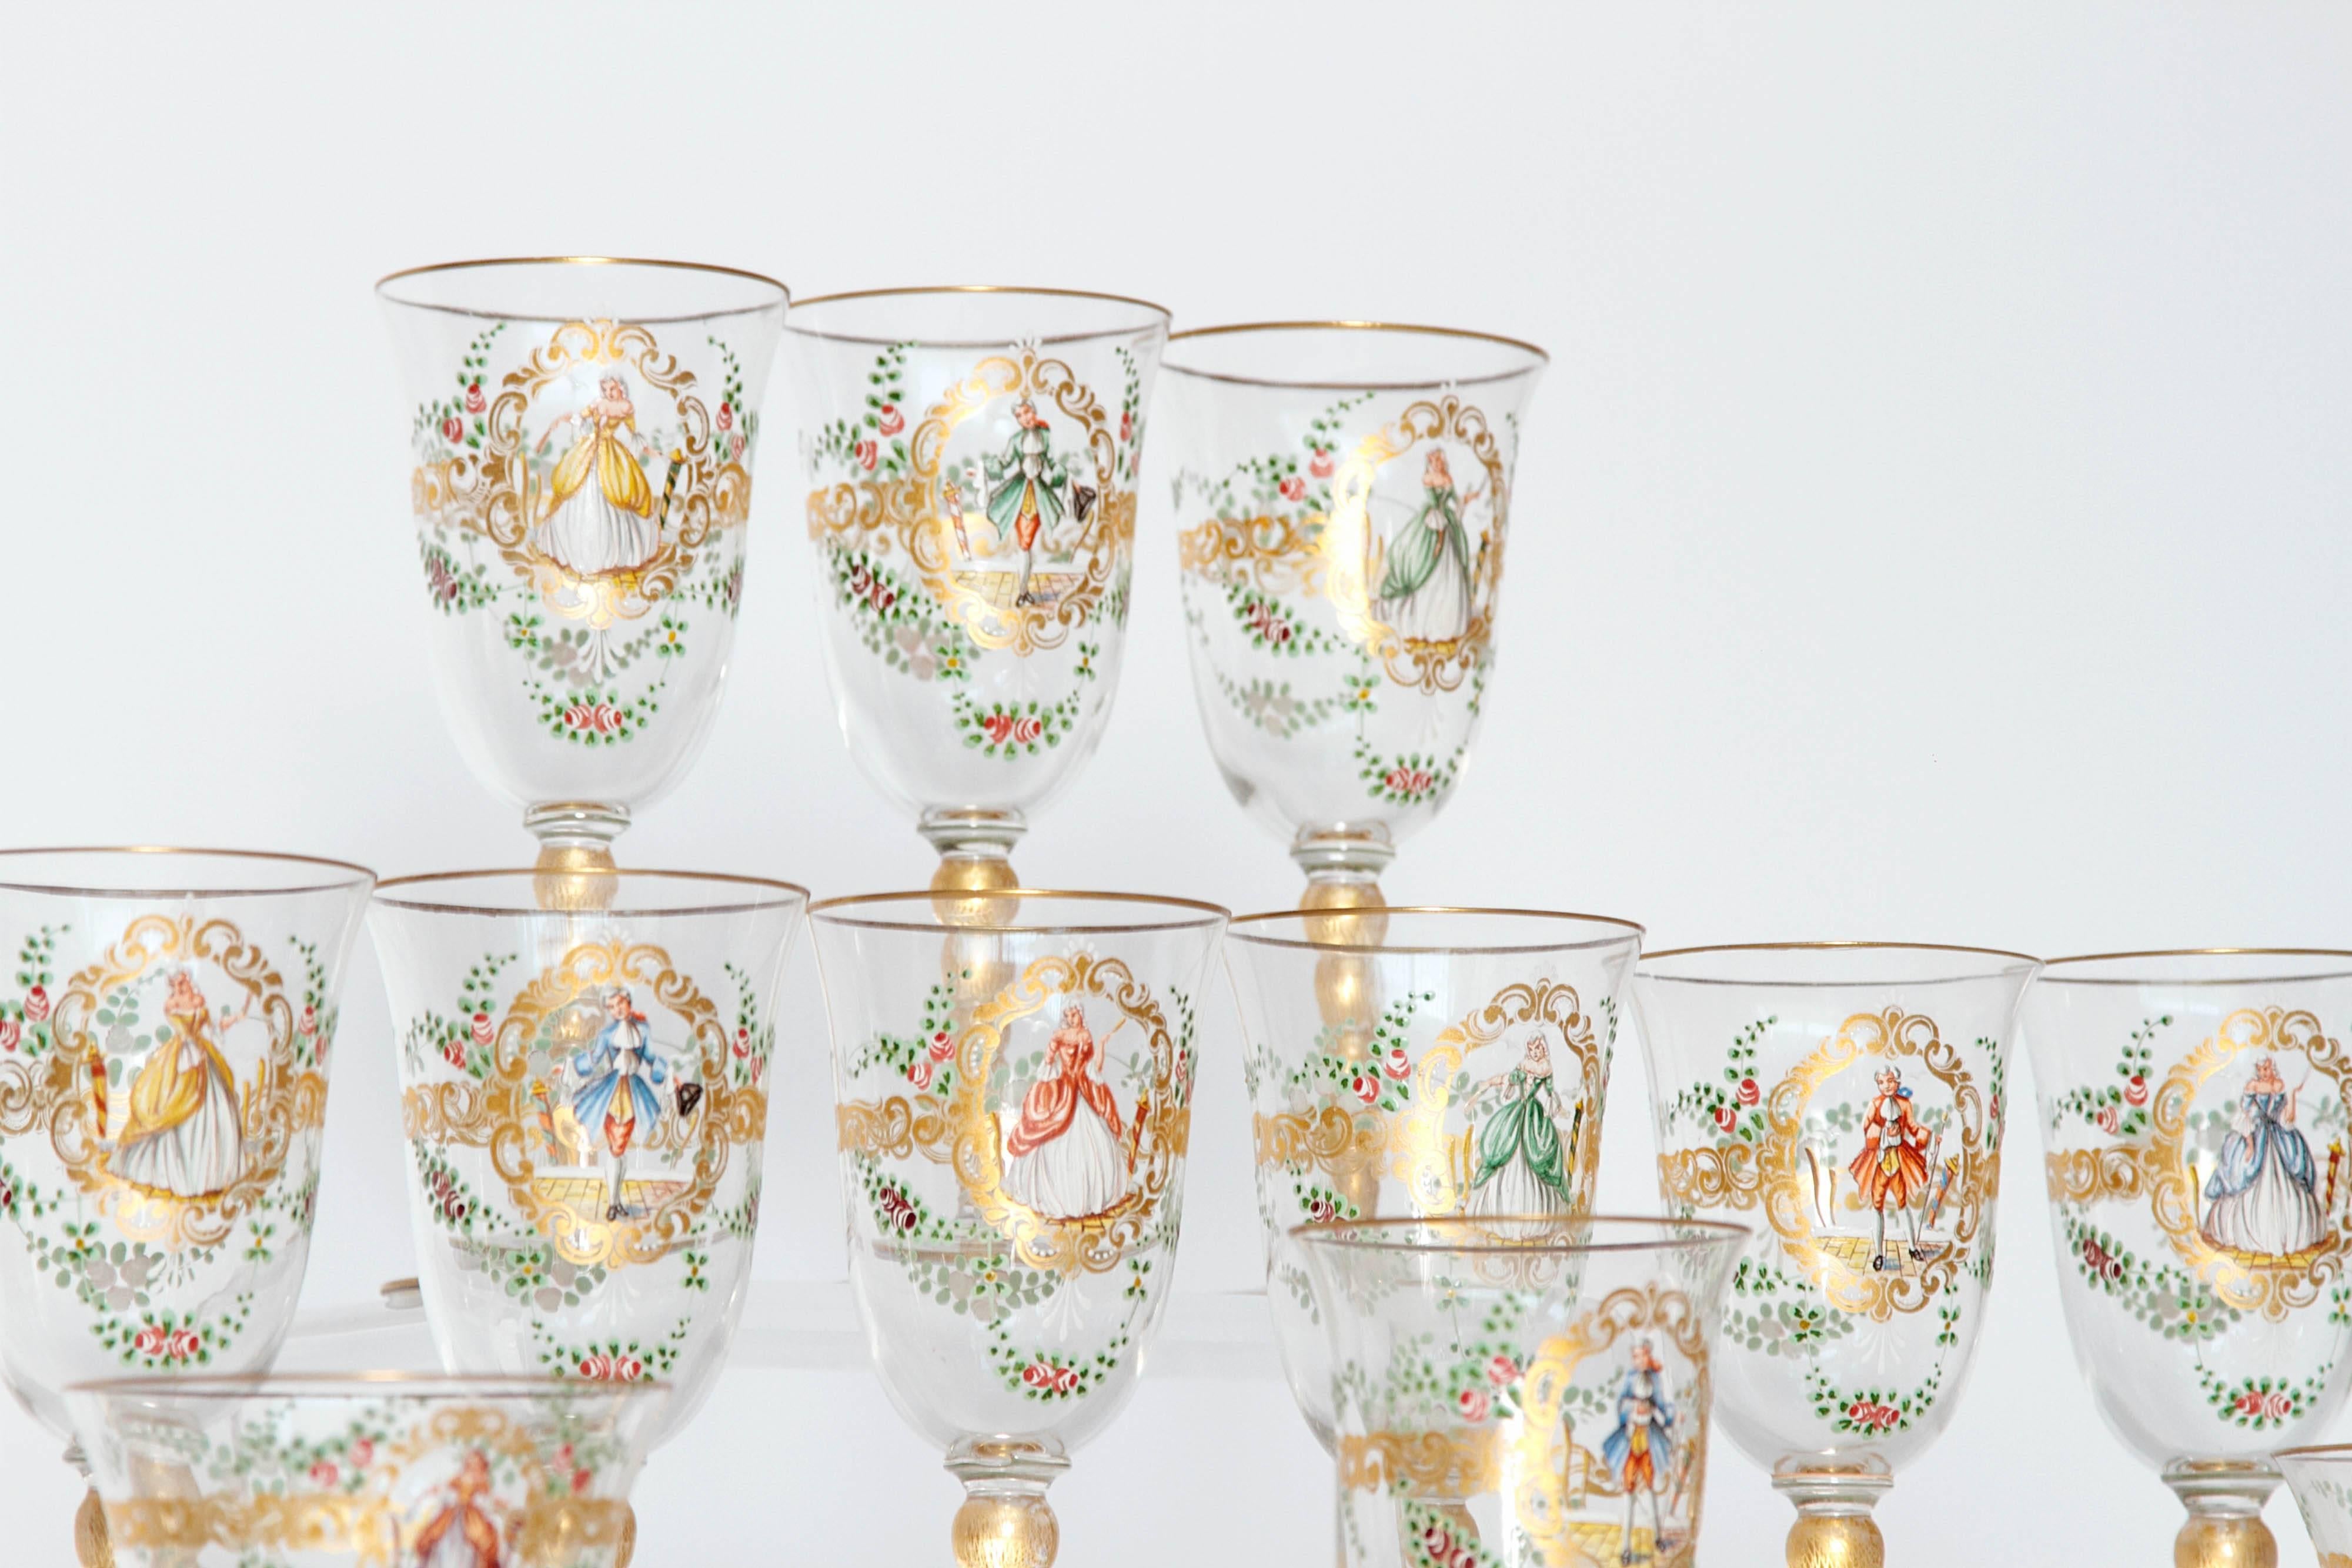 Hand-Painted Enameled Venetian Glass Stemware or Group of 23 Pieces